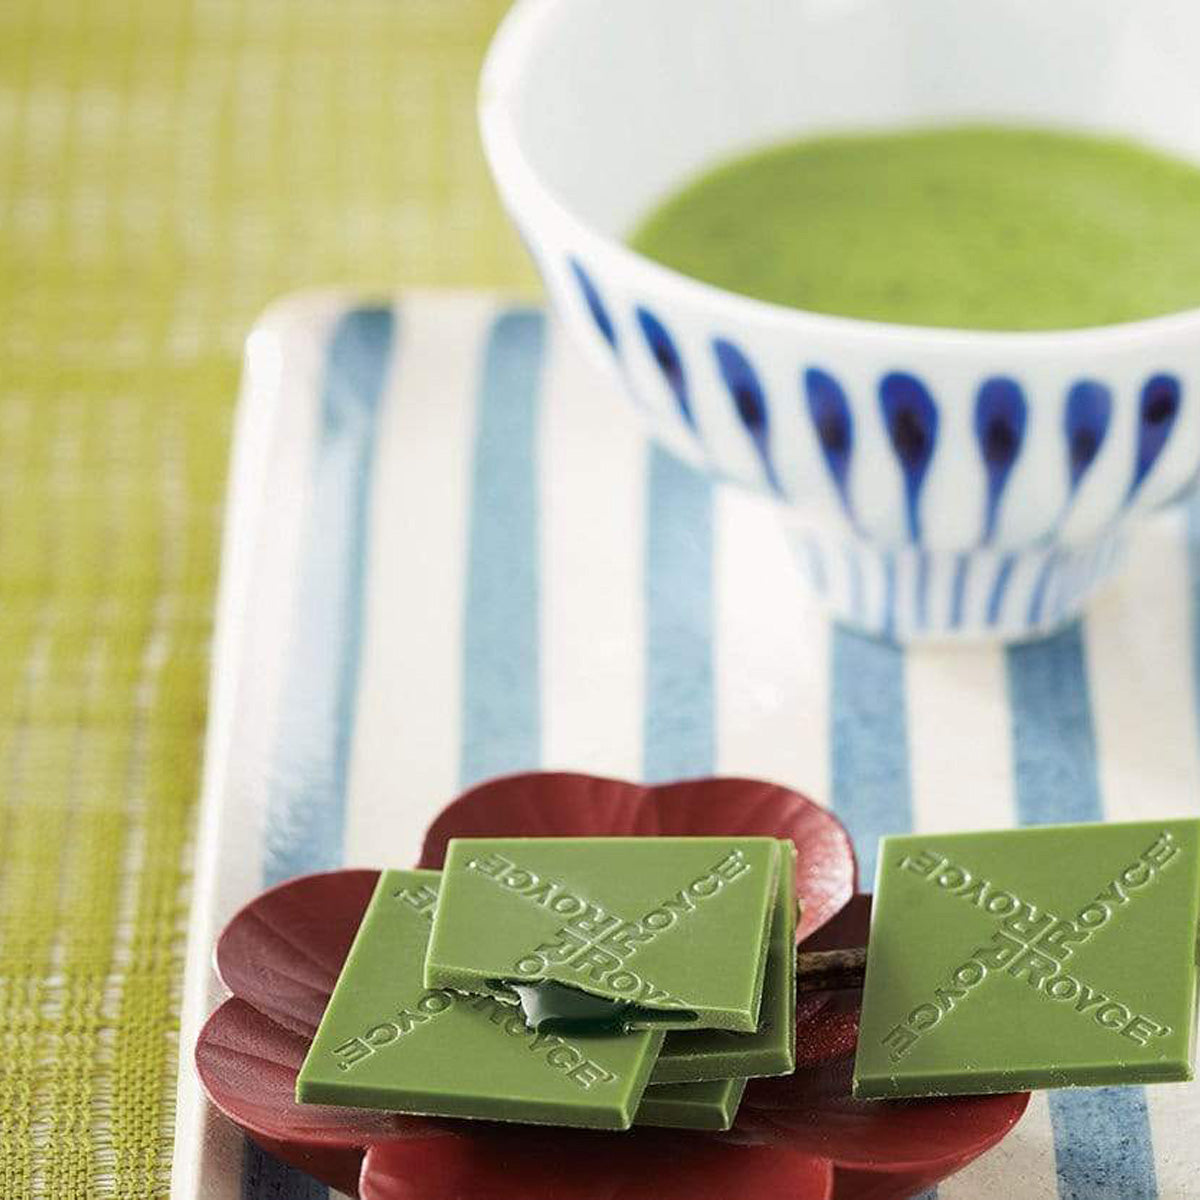 ROYCE' Chocolate - Prafeuille Chocolat "Matcha" - Image shows green chocolate squares filled with green sauce and engraved with the words "ROYCE'", as placed on a brown flower-shaped plate and a plate with blue and white stripes. Accents include a tea cup in blue and white filled with green tea. Background is in green color.